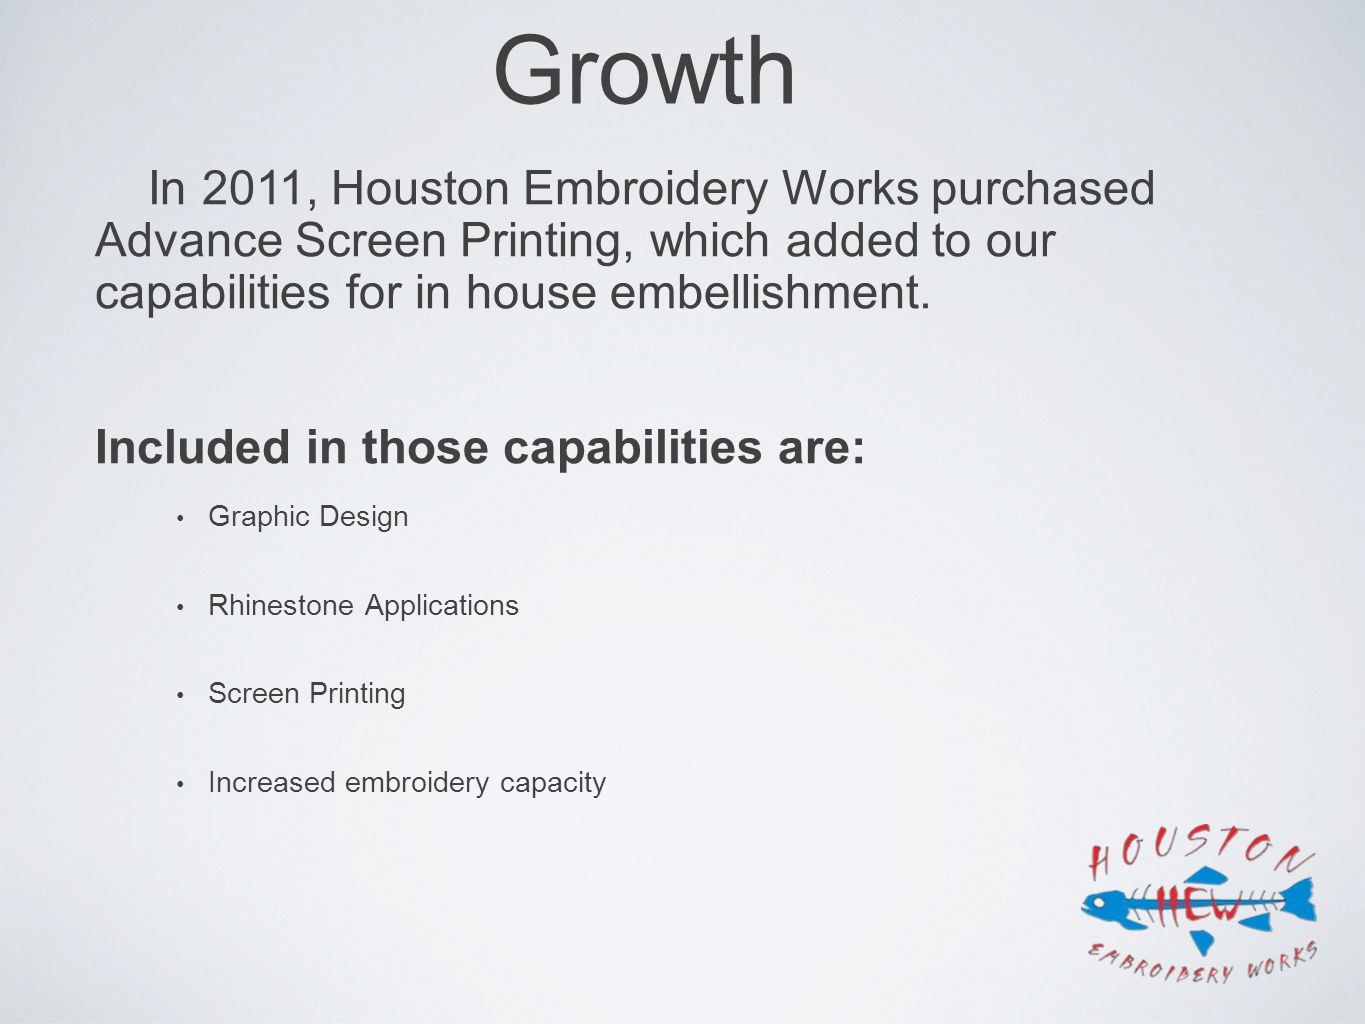 Growth In 2011, Houston Embroidery Works purchased Advance Screen Printing, which added to our capabilities for in house embellishment.